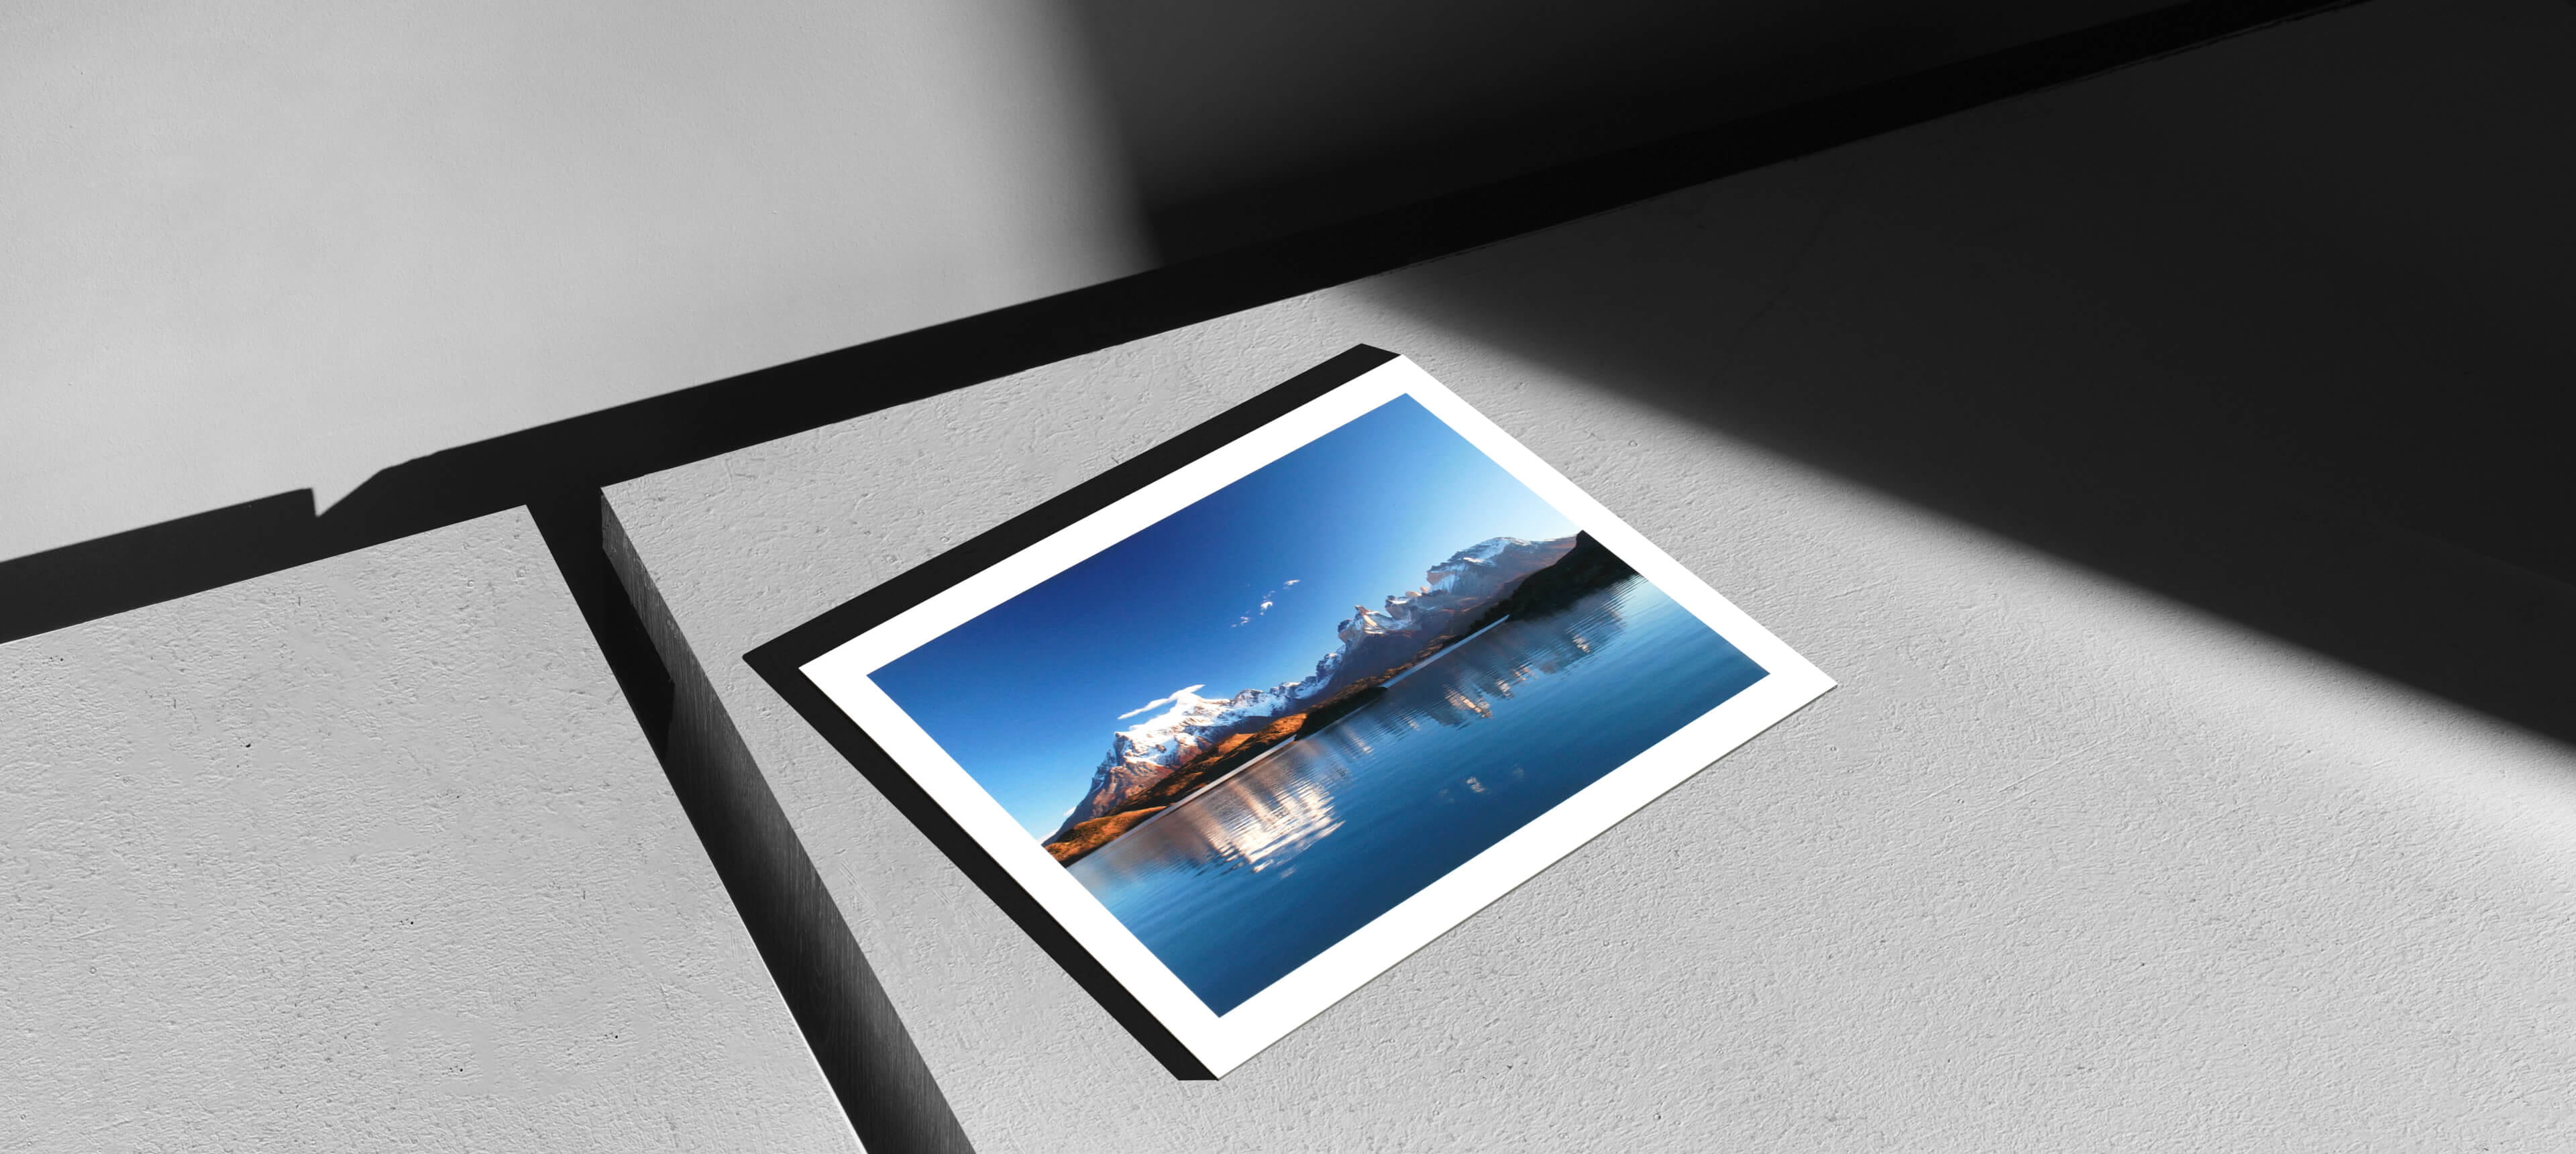 fine art print on grey table with photo showing mountains